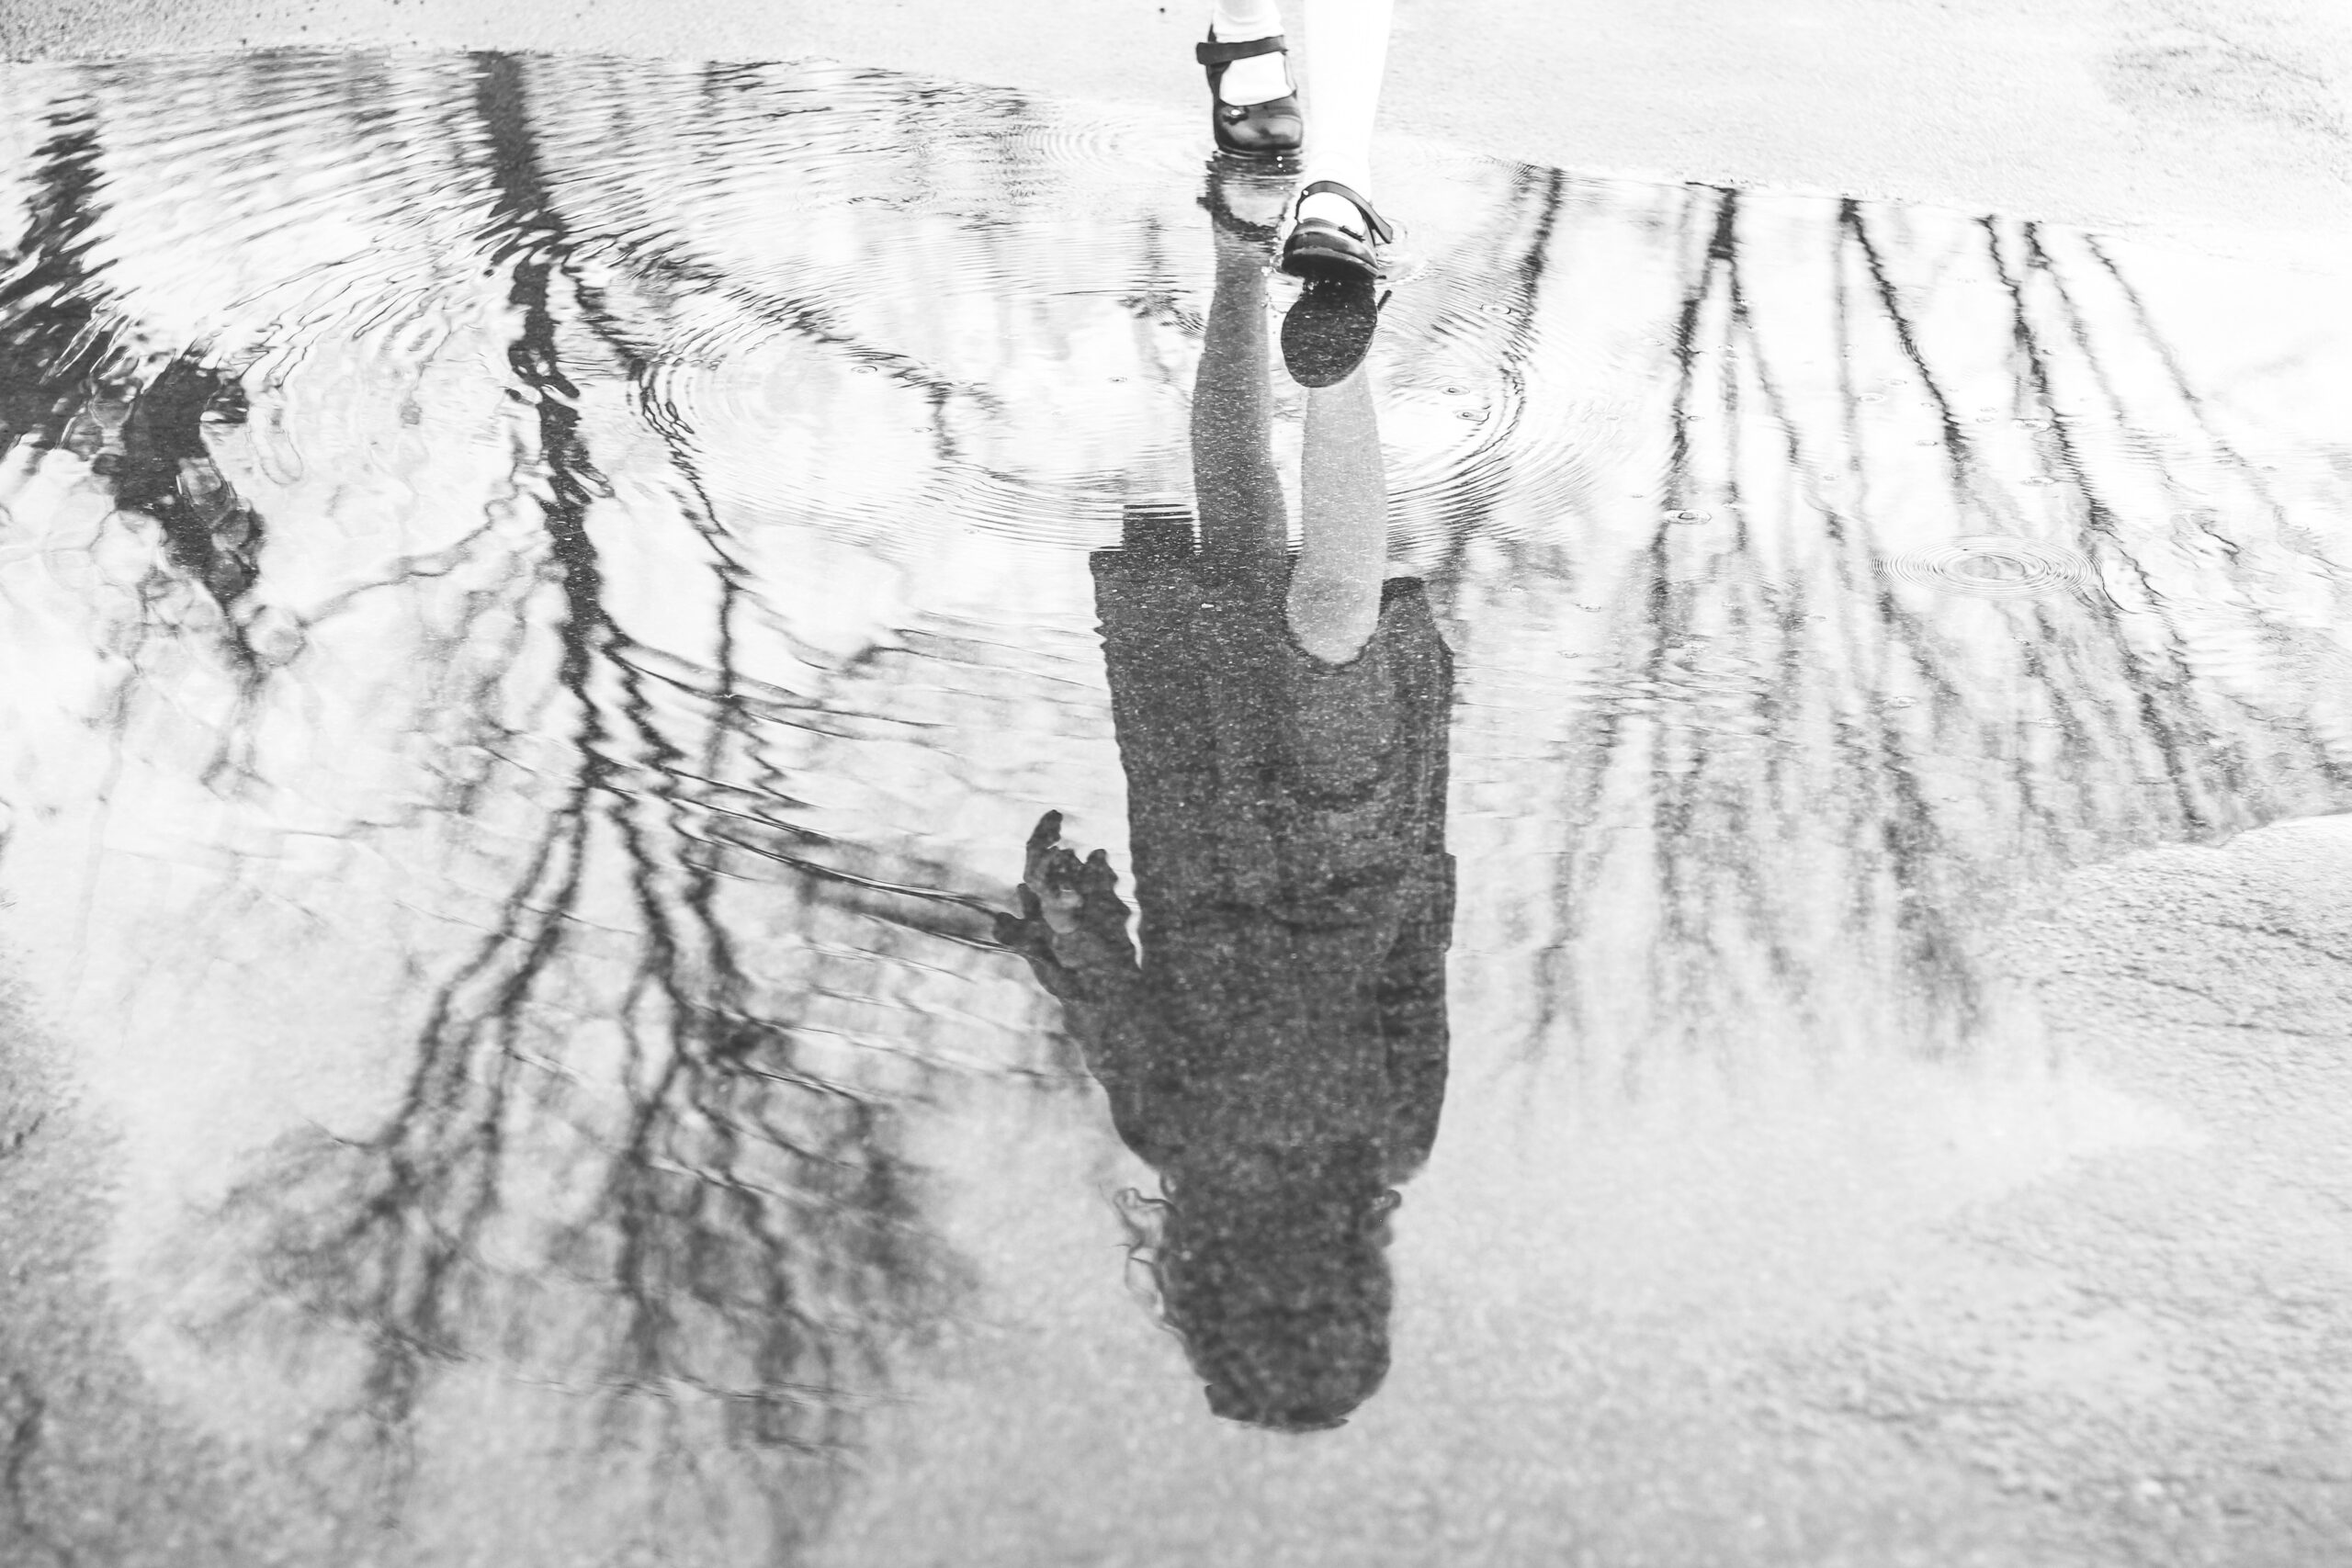 reflection of a girl upside-down in a puddle